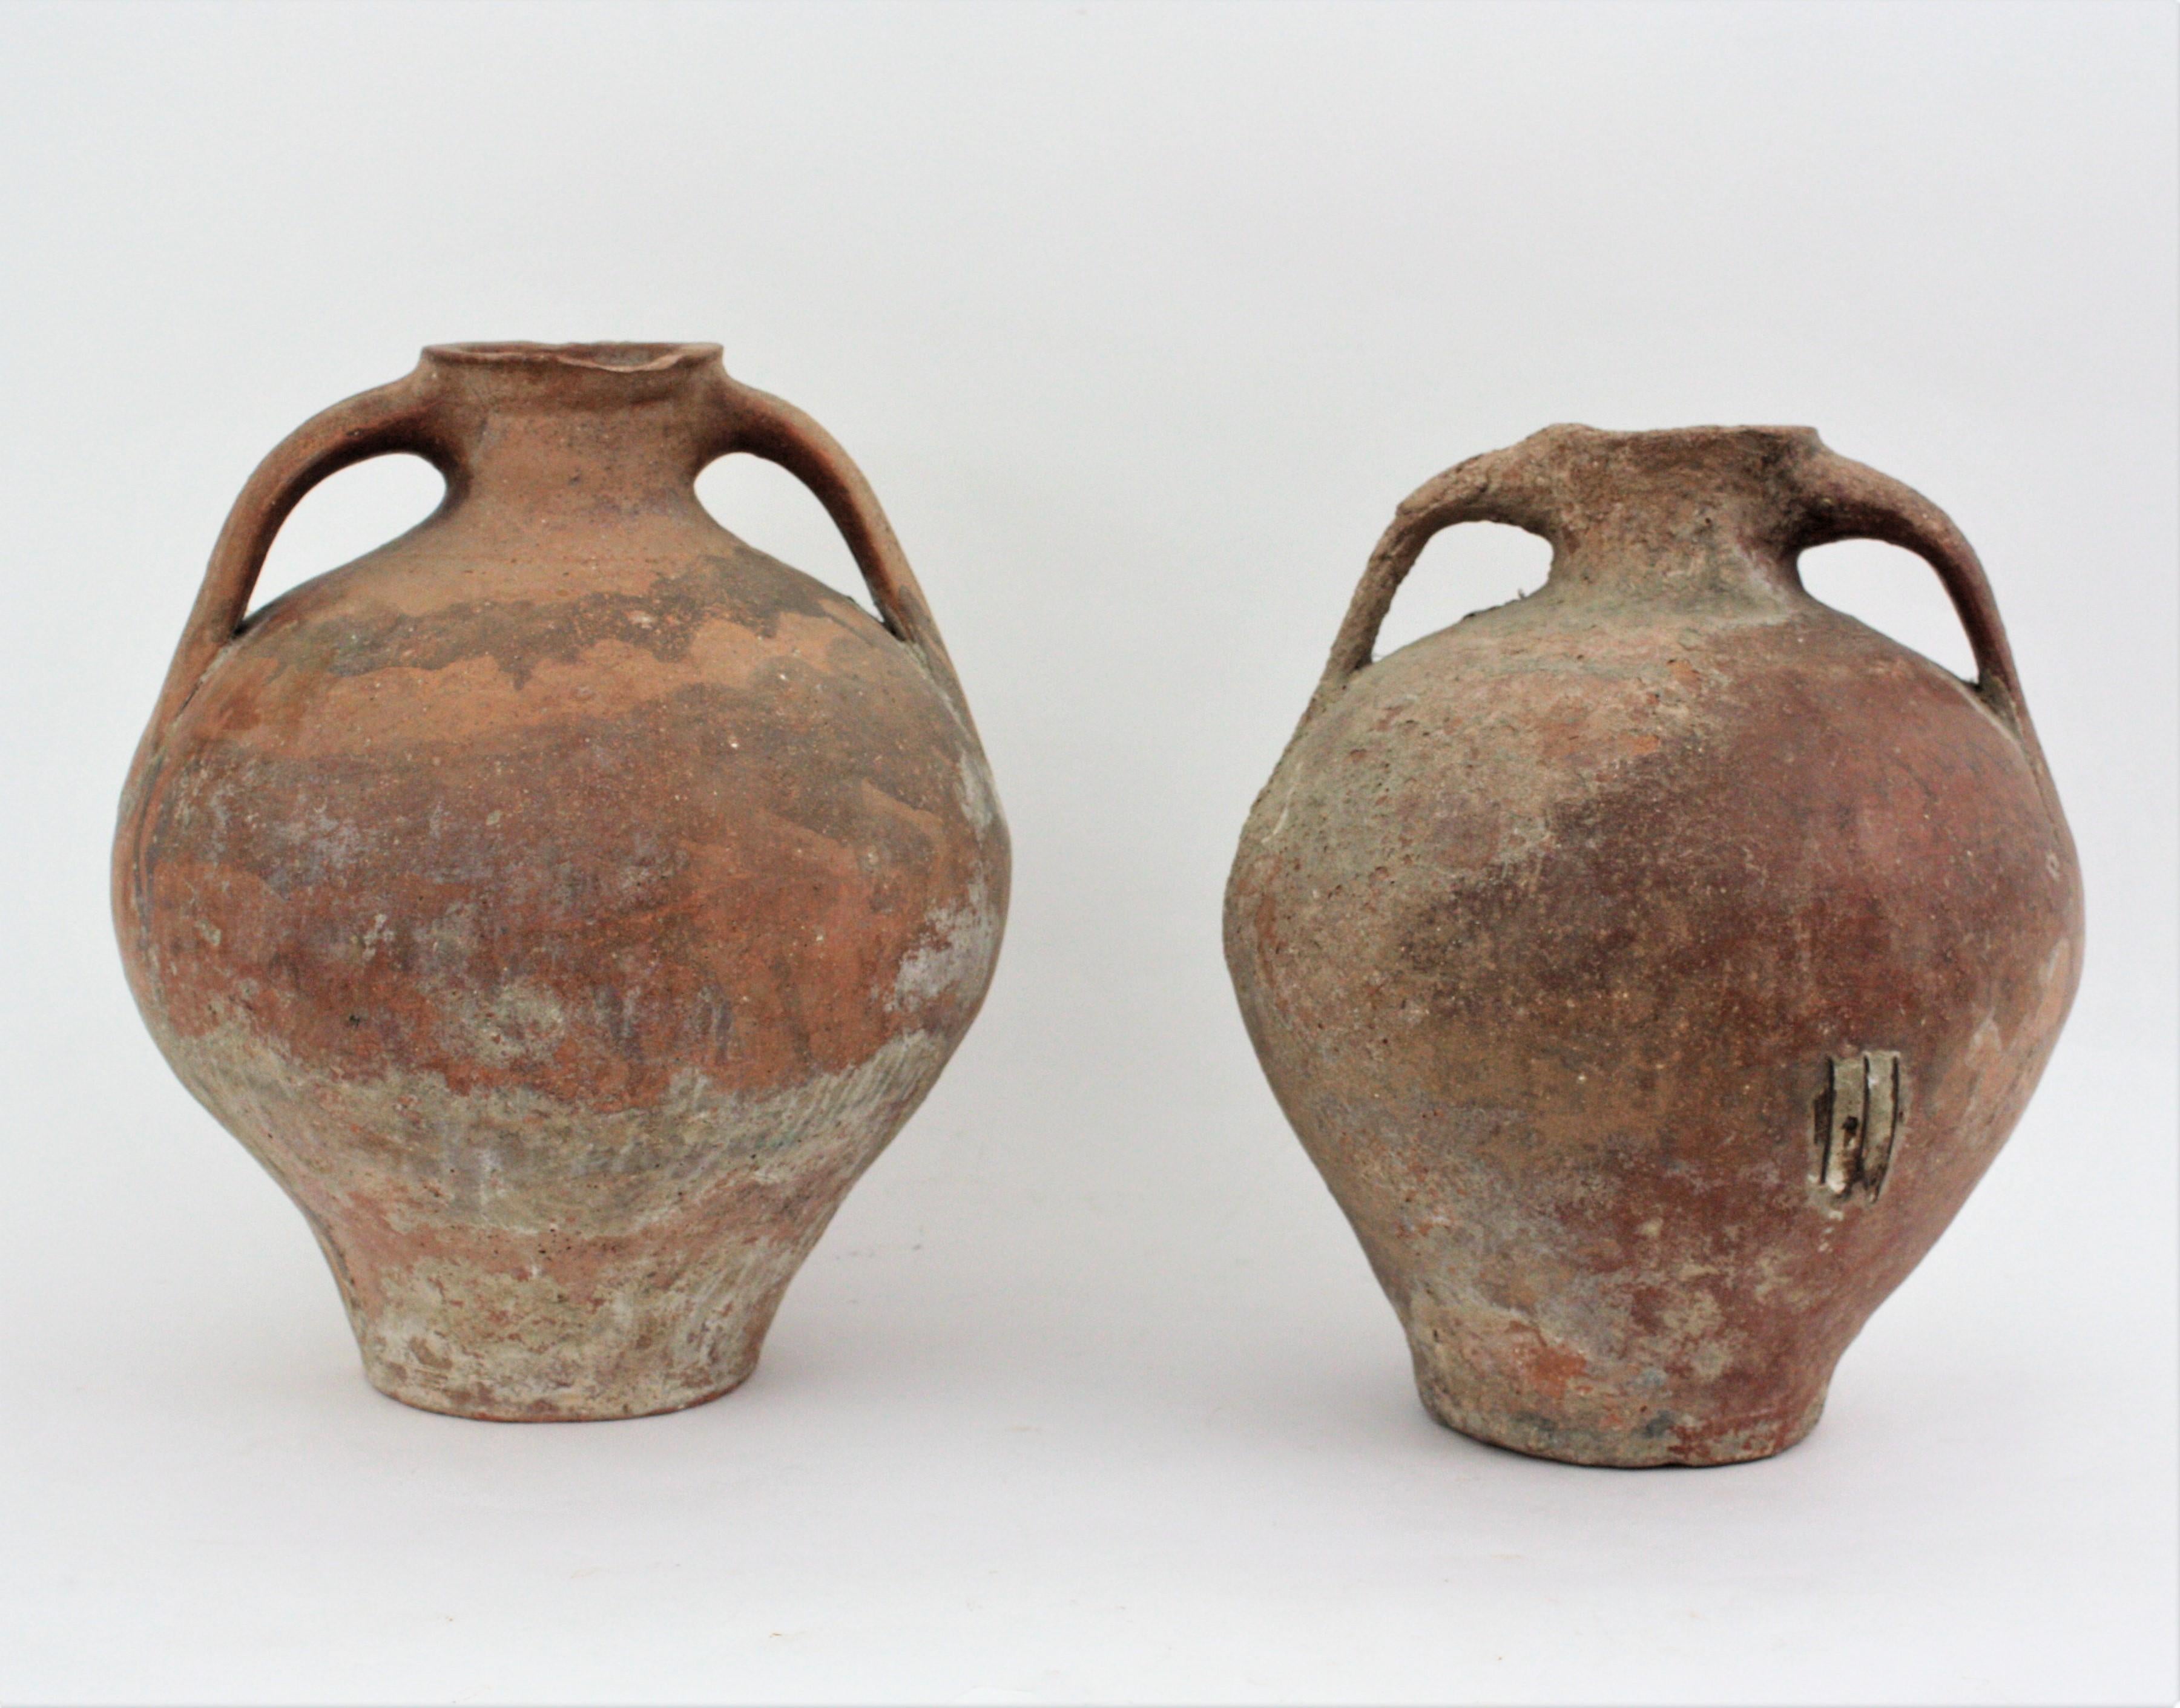 Handmade terracotta two-handled water jars / pitchers, Spain, 1880s-1930s.
Two Traditional Spanish terracotta pitchers. Unglazed exterior and interior with handles at both sides. Used as water containers. Terrific antique patina with antique